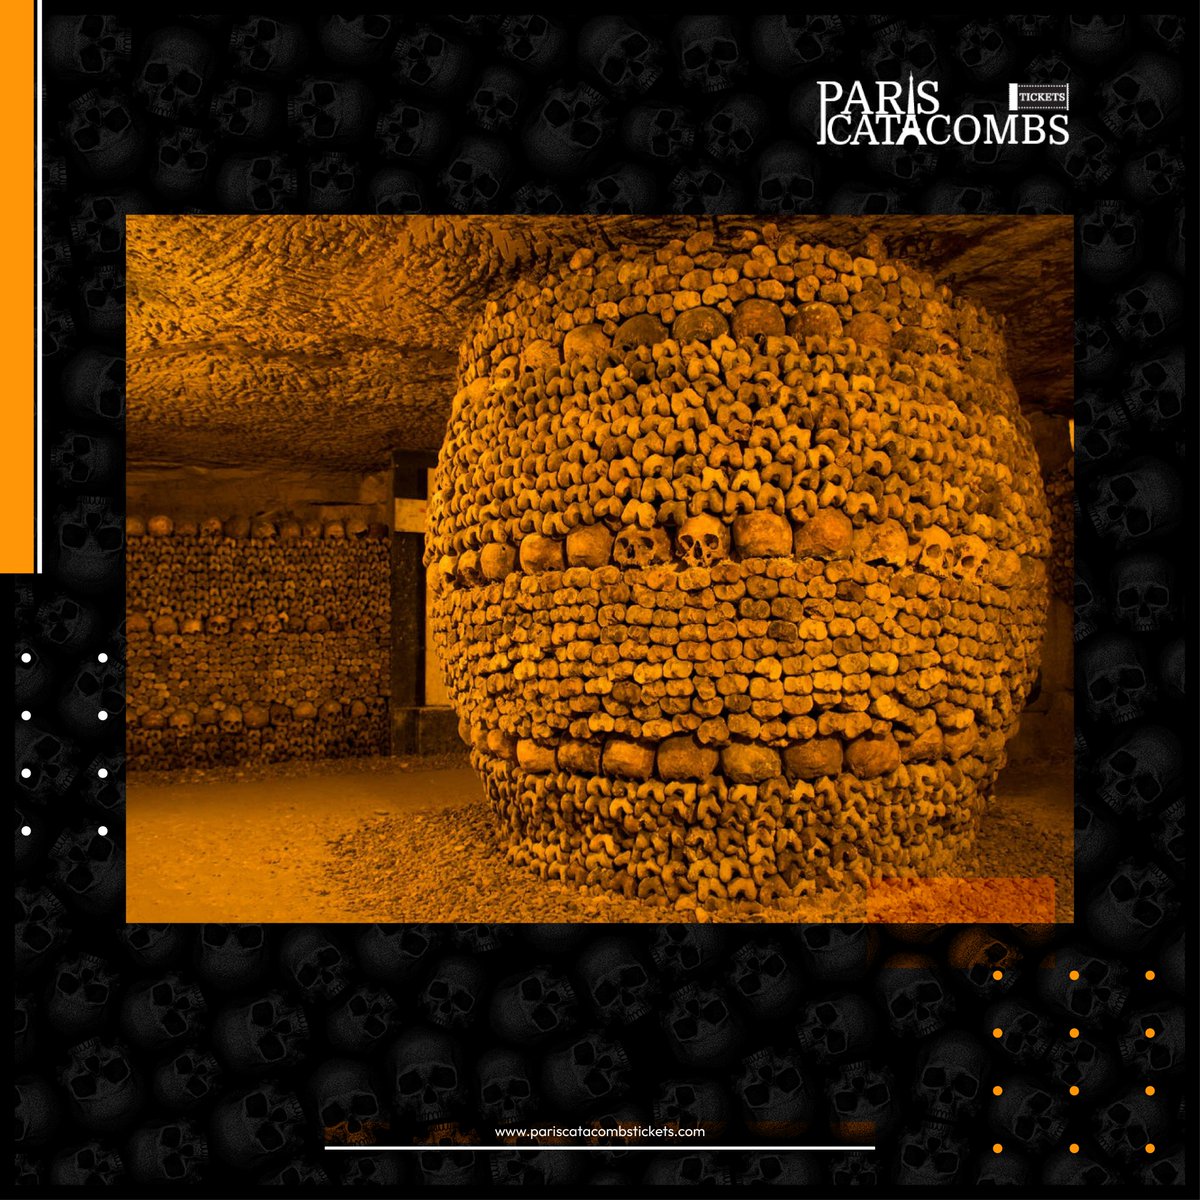 A chilling arrangement of femurs and skulls in the catacombs, telling tales of old Paris.

#pariscatacombs #catacombsofparis #catacombs #paristour #travelling #exploretheworld